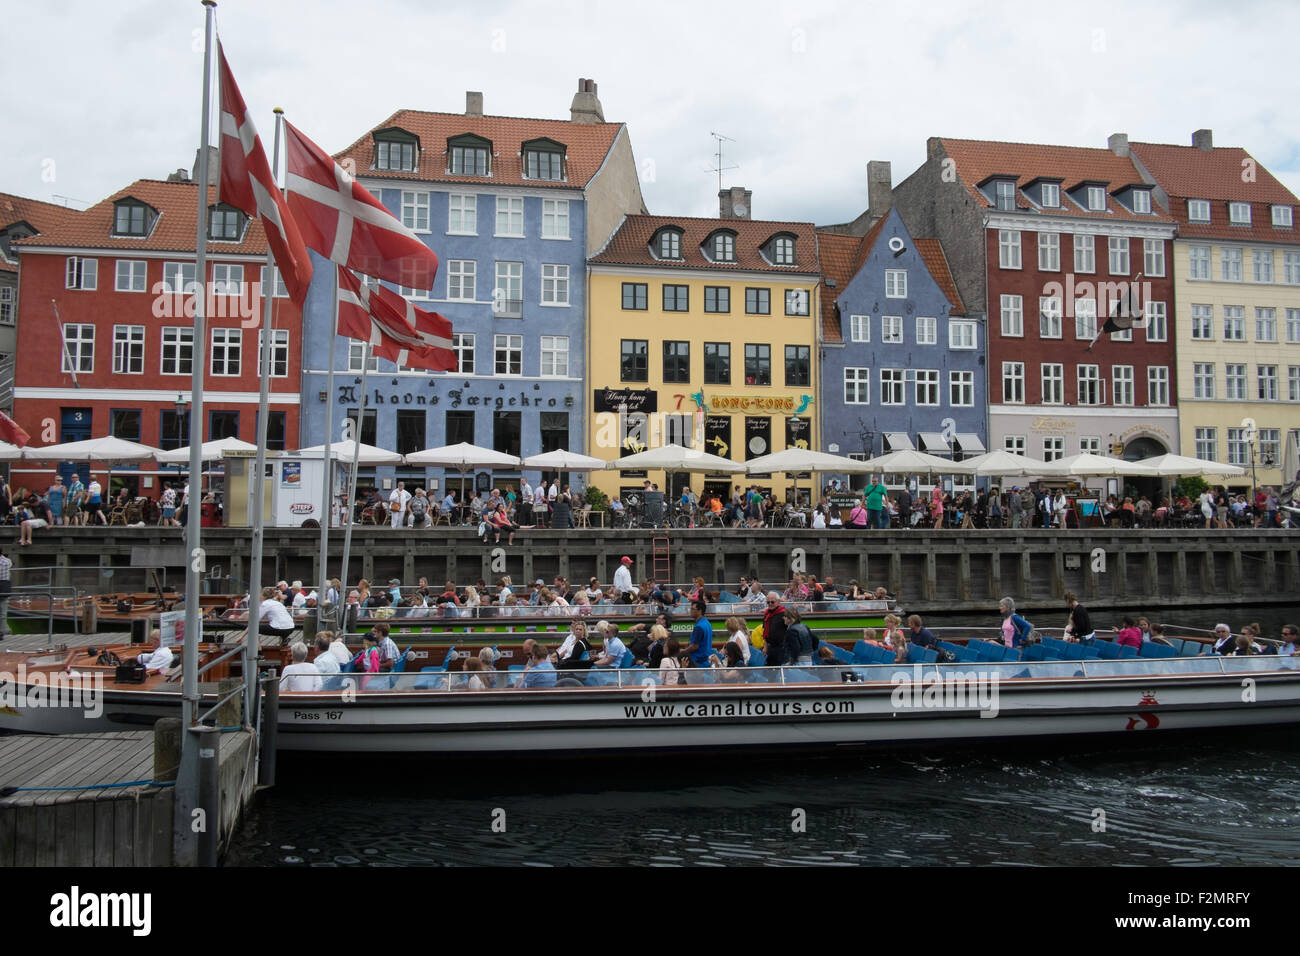 Tourists taking a canal trip at Nyhavn New Harbour Copenhagen Denmark Stock Photo